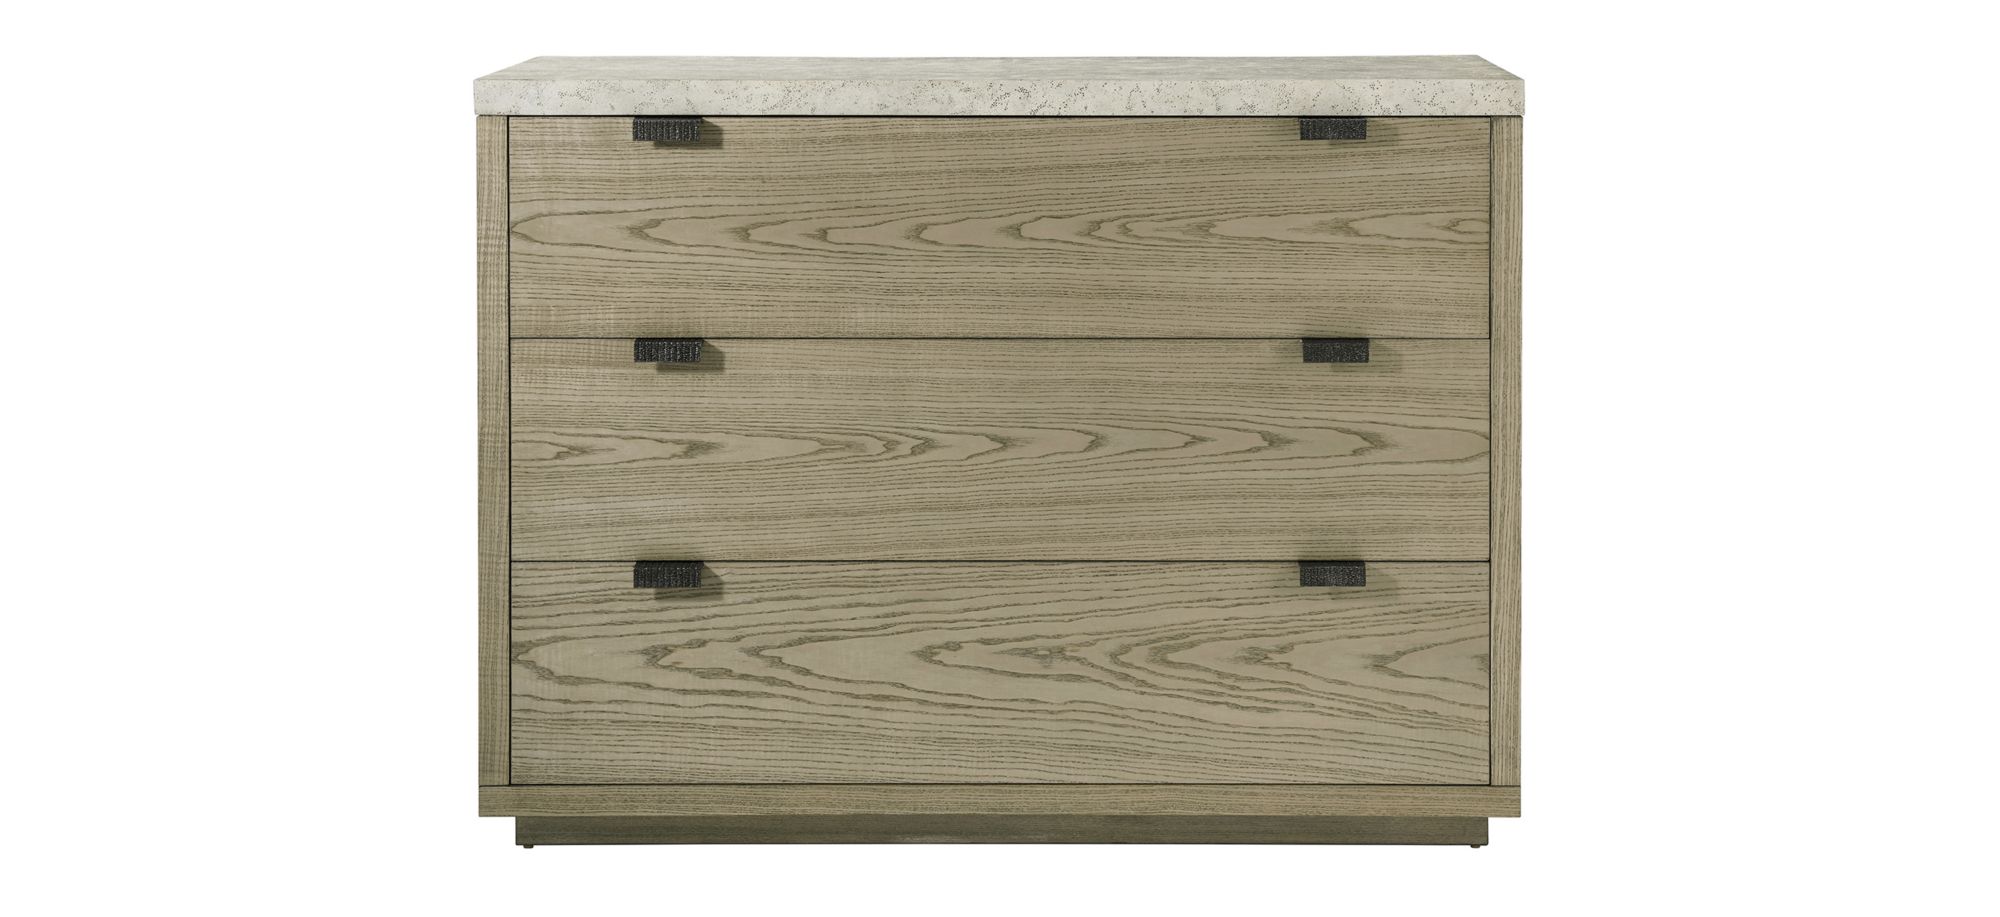 Catalina Chest of Drawers in Dune by Theodore Alexander